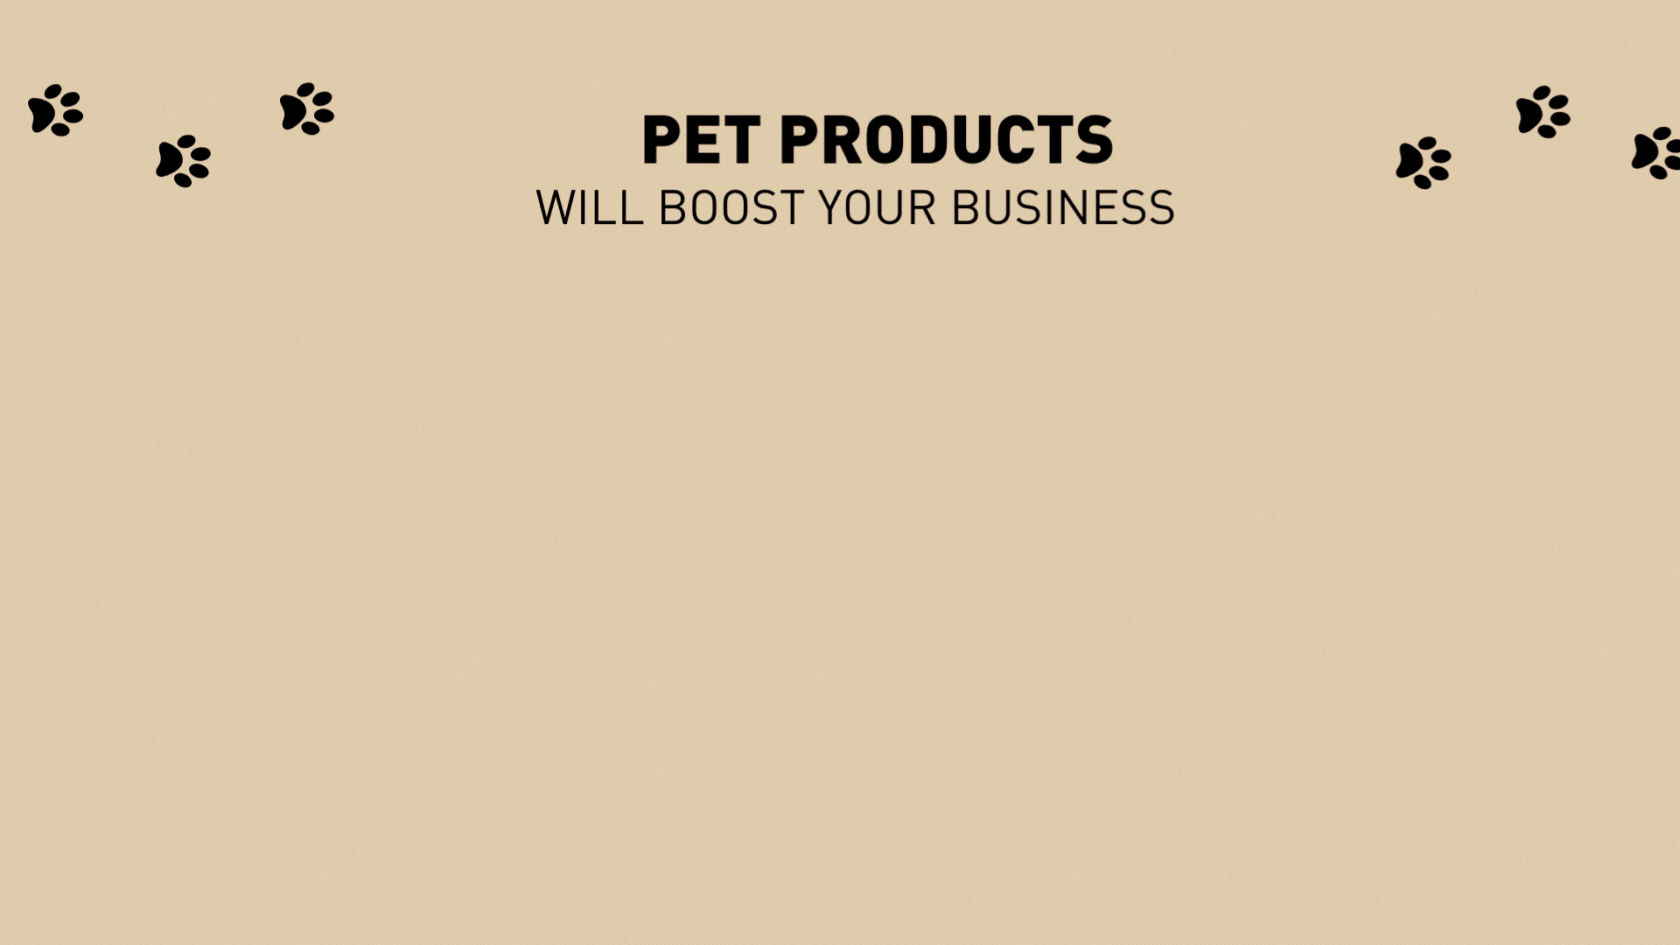 PET PRODUCTS THAT WILL BOOST YOUR BUSINESS